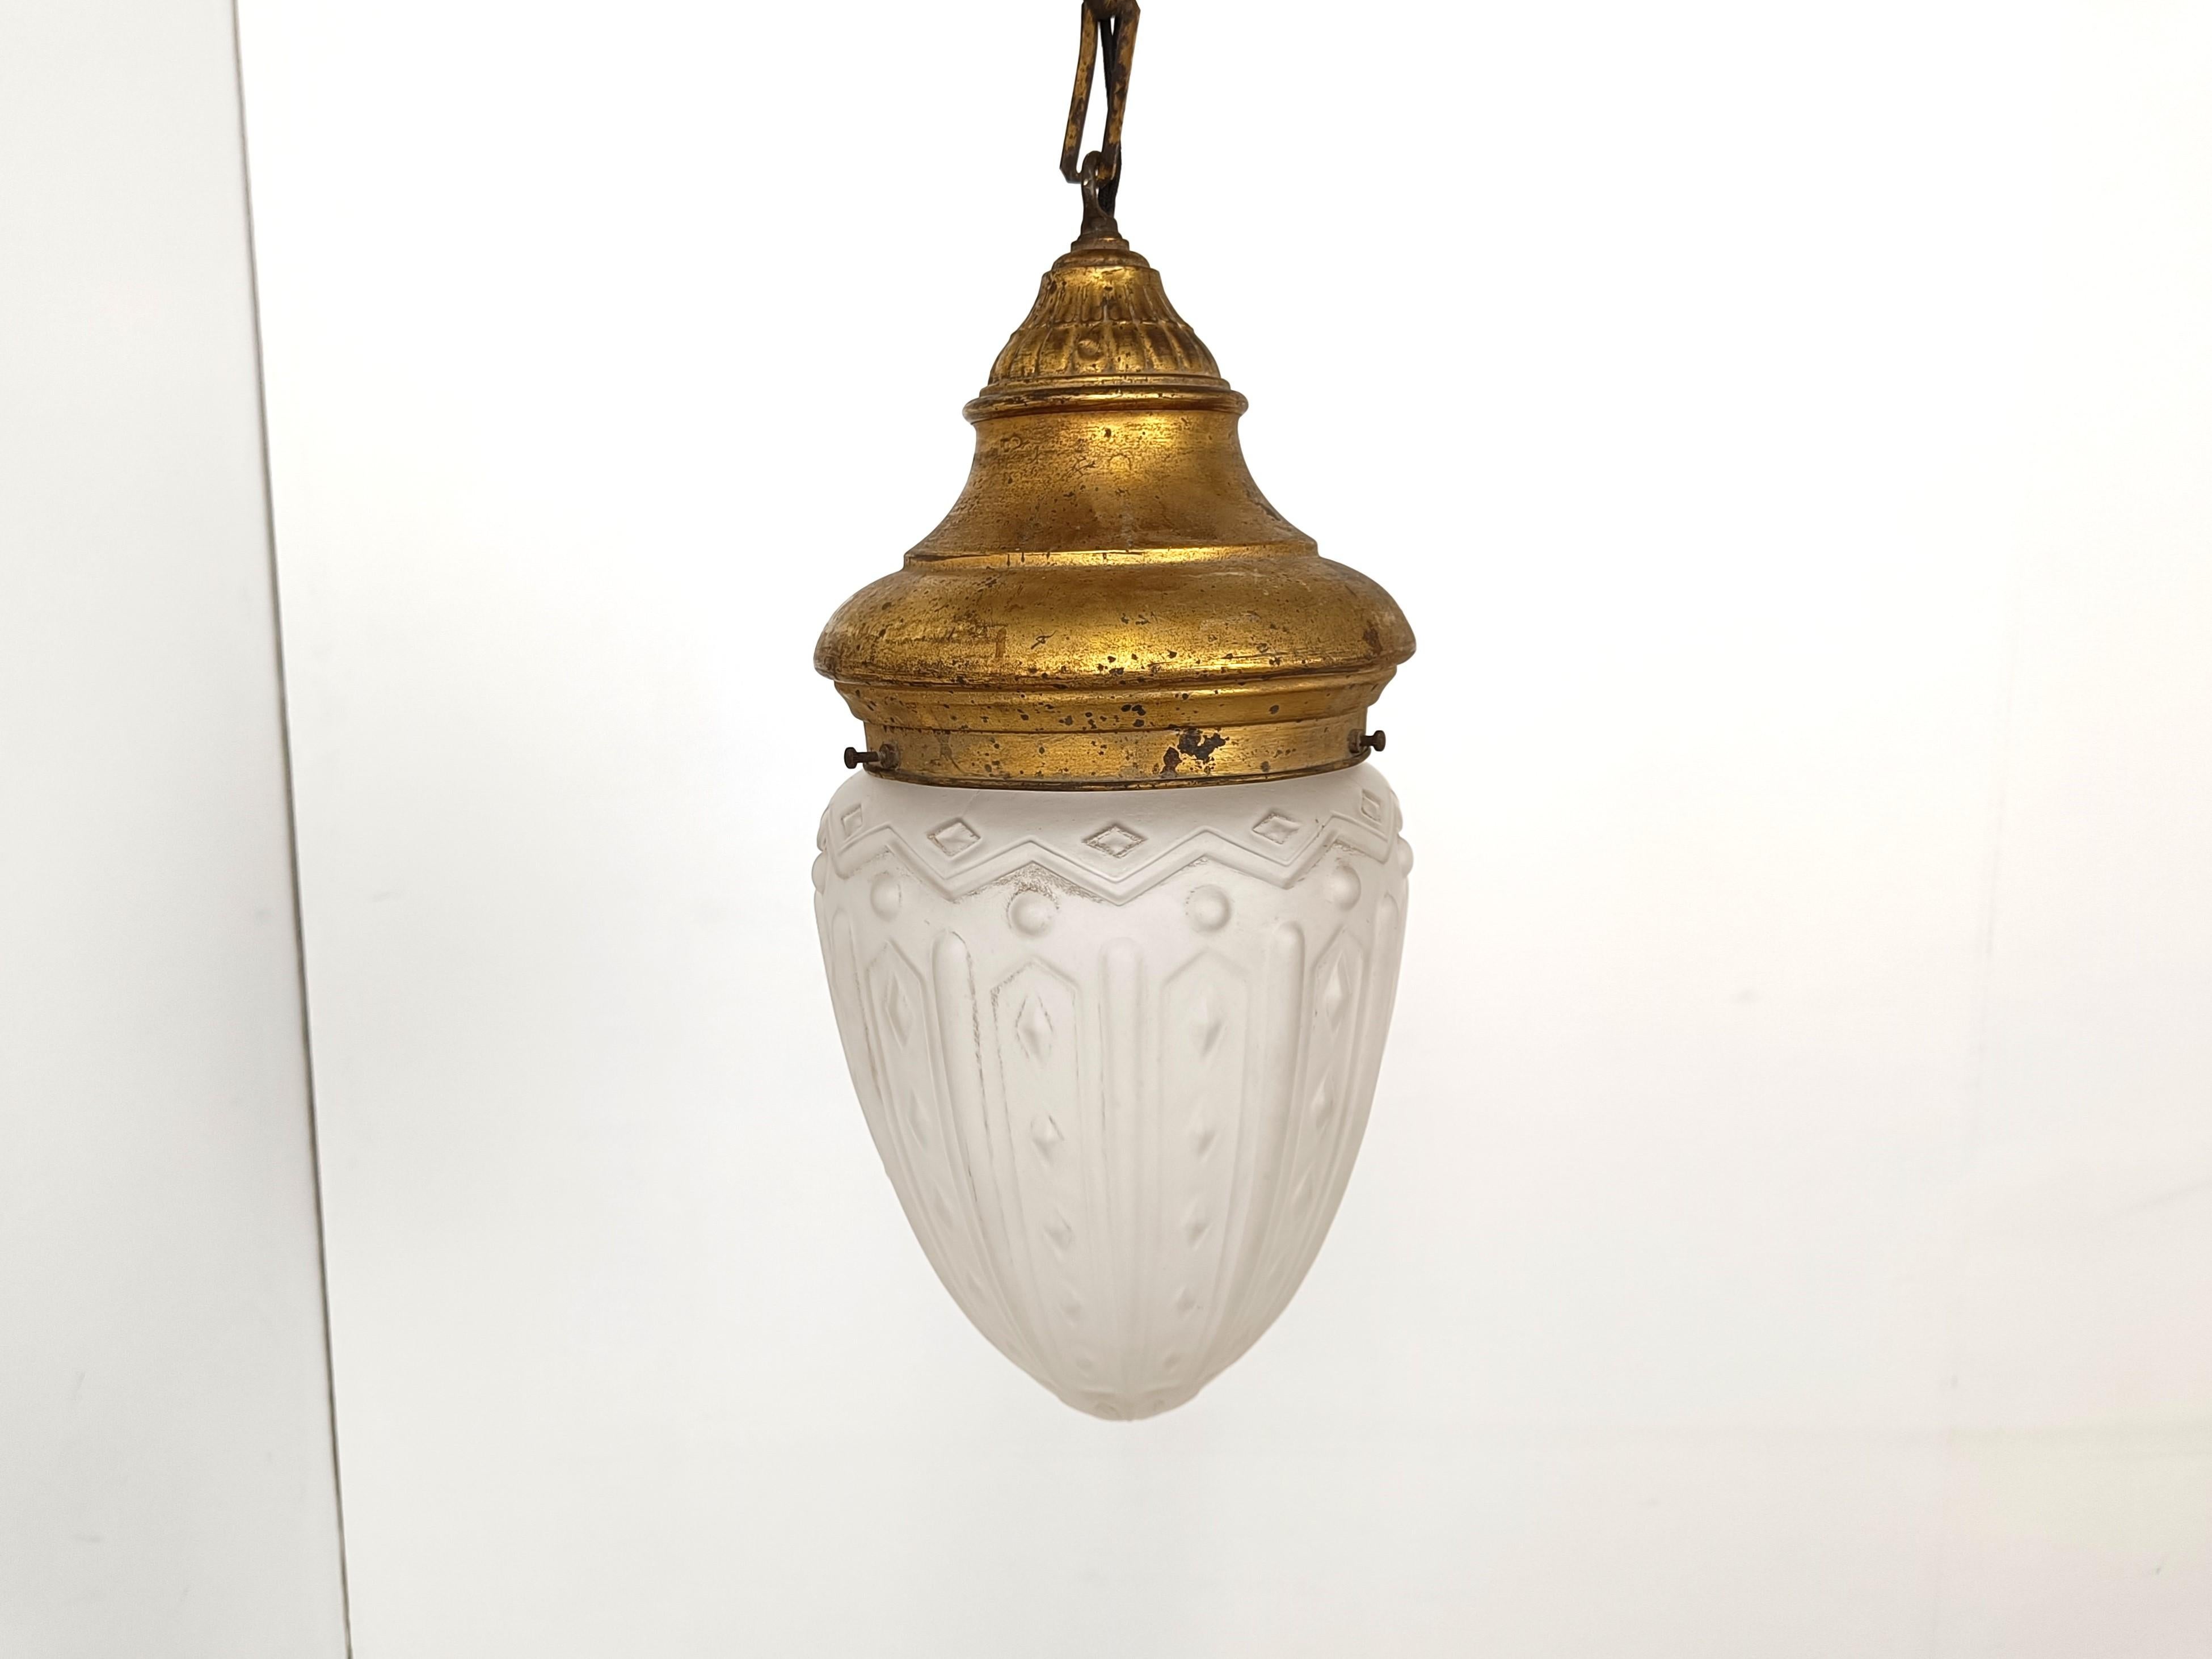 Vintage neoclassical style pendant light from the 1950s.

Gilt metal shade holder and decorated matte glass.

Tested and ready for use with a regular E27 light bulb holder.

1950s - France

Dimensions:
Height: 75cm (chain can be adjusted)
Width x